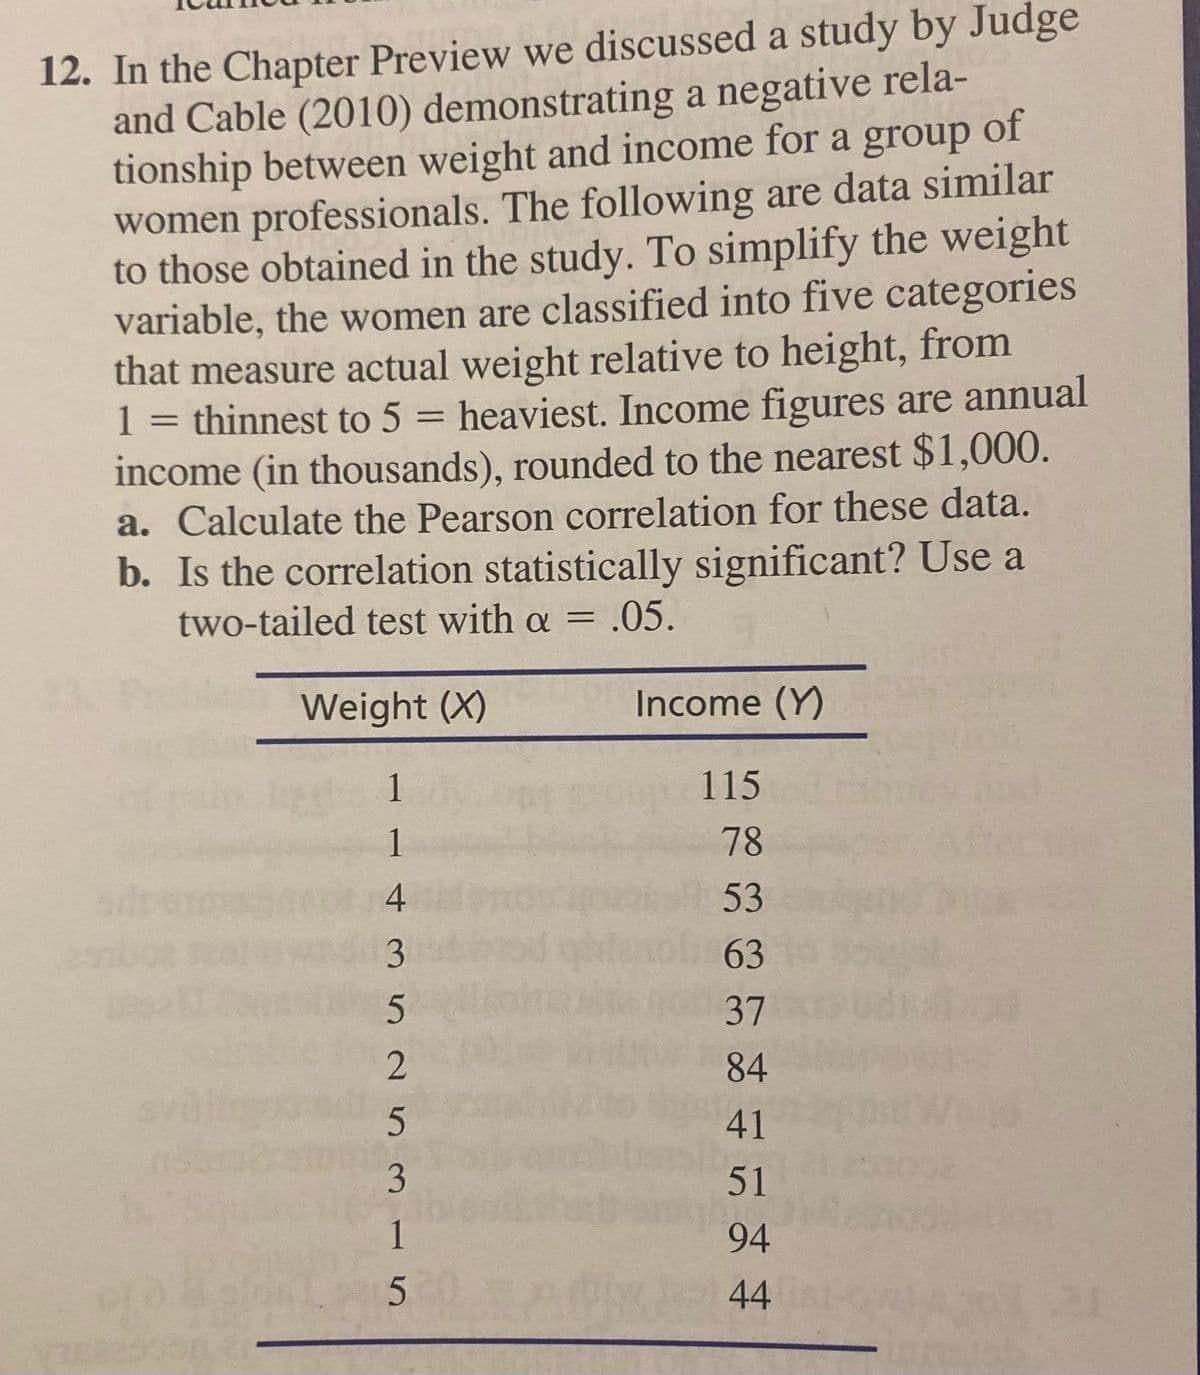 12. In the Chapter Preview we discussed a study by Judge
and Cable (2010) demonstrating a negative rela-
tionship between weight and income for a group of
women professionals. The following are data similar
to those obtained in the study. To simplify the weight
variable, the women are classified into five categories
that measure actual weight relative to height, from
thinnest to 5 = heaviest. Income figures are annual
income (in thousands), rounded to the nearest $1,000.
a. Calculate the Pearson correlation for these data.
b. Is the correlation statistically significant? Use a
two-tailed test with a = .05.
1
%3D
Weight (X)
Income (Y)
1
115
1
78
4
53
3
63
2
84
41
3
51
1
94
44
37
